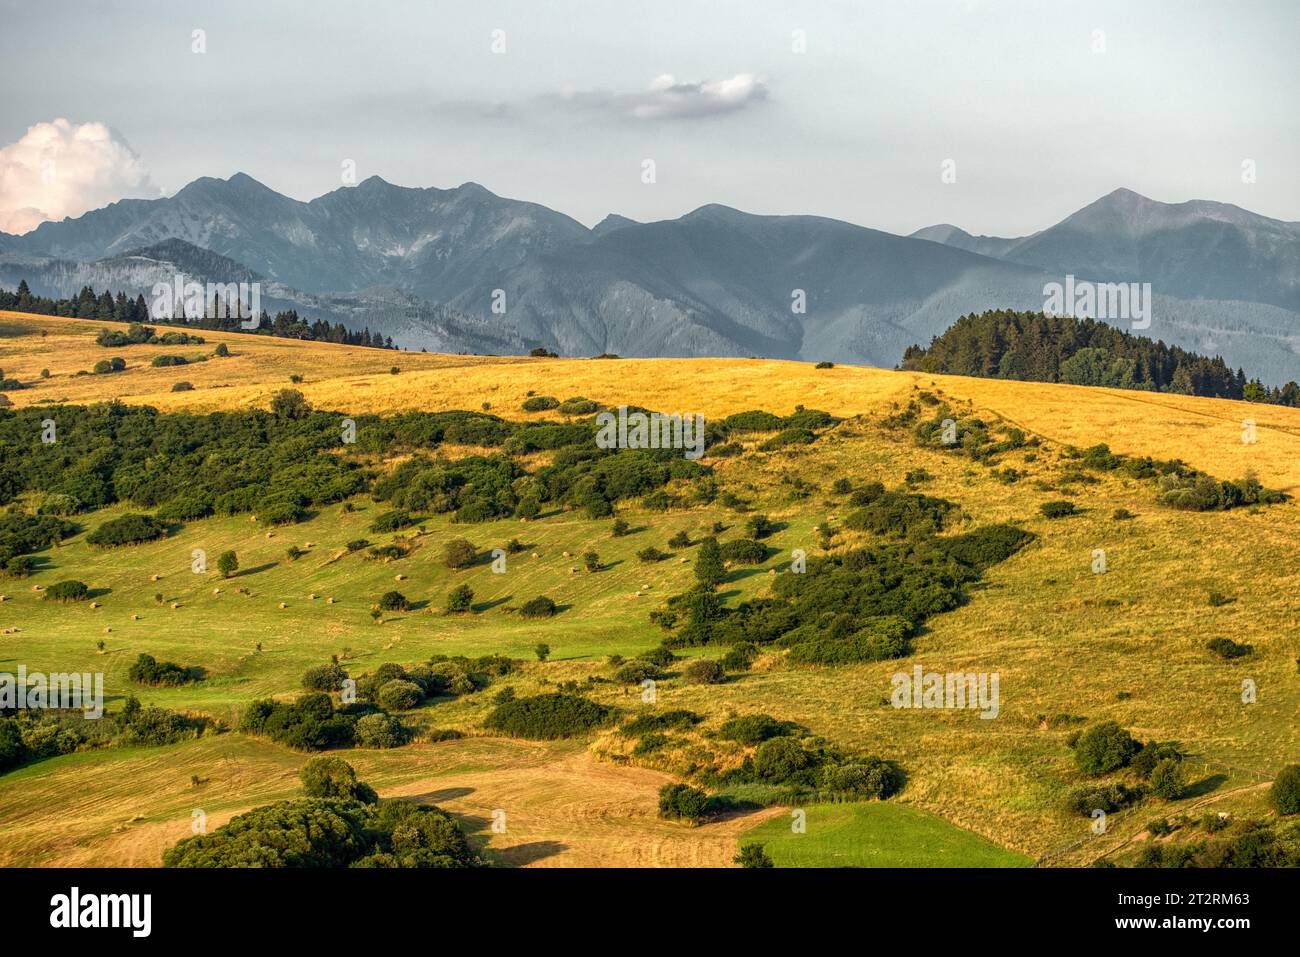 Beautiful landscape in region Liptov and Western Tatras mountains at background in Slovakia. Stock Photo